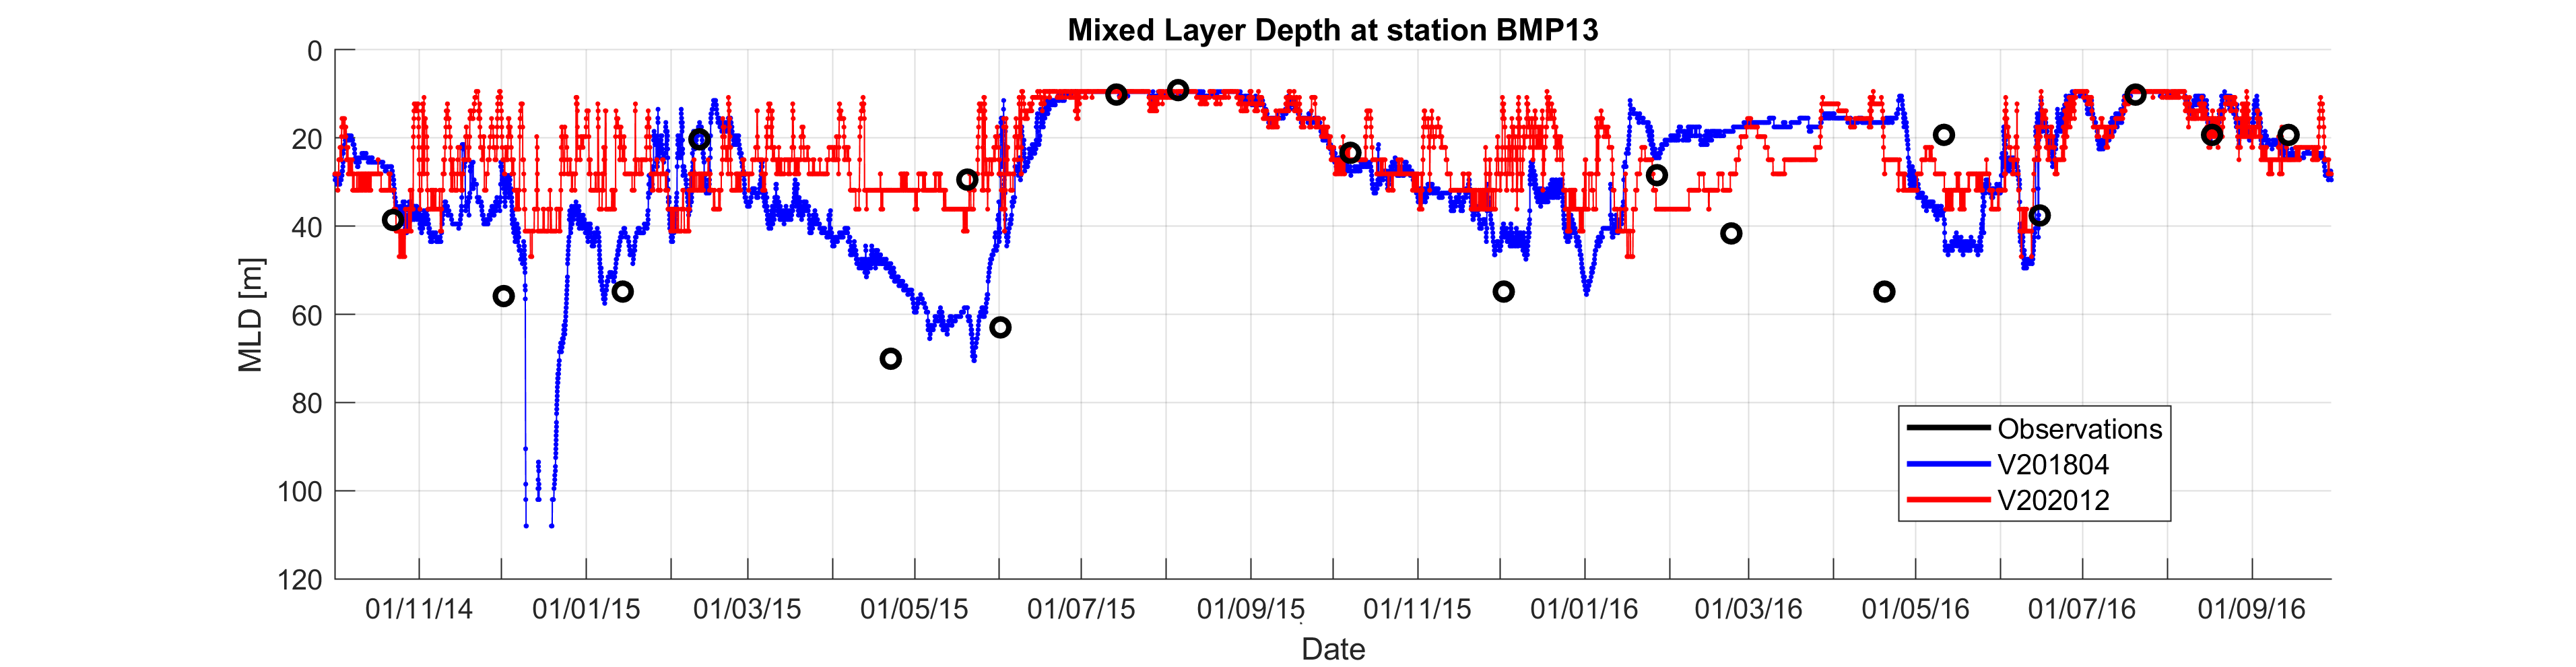 Mixed Layer Depth Stations